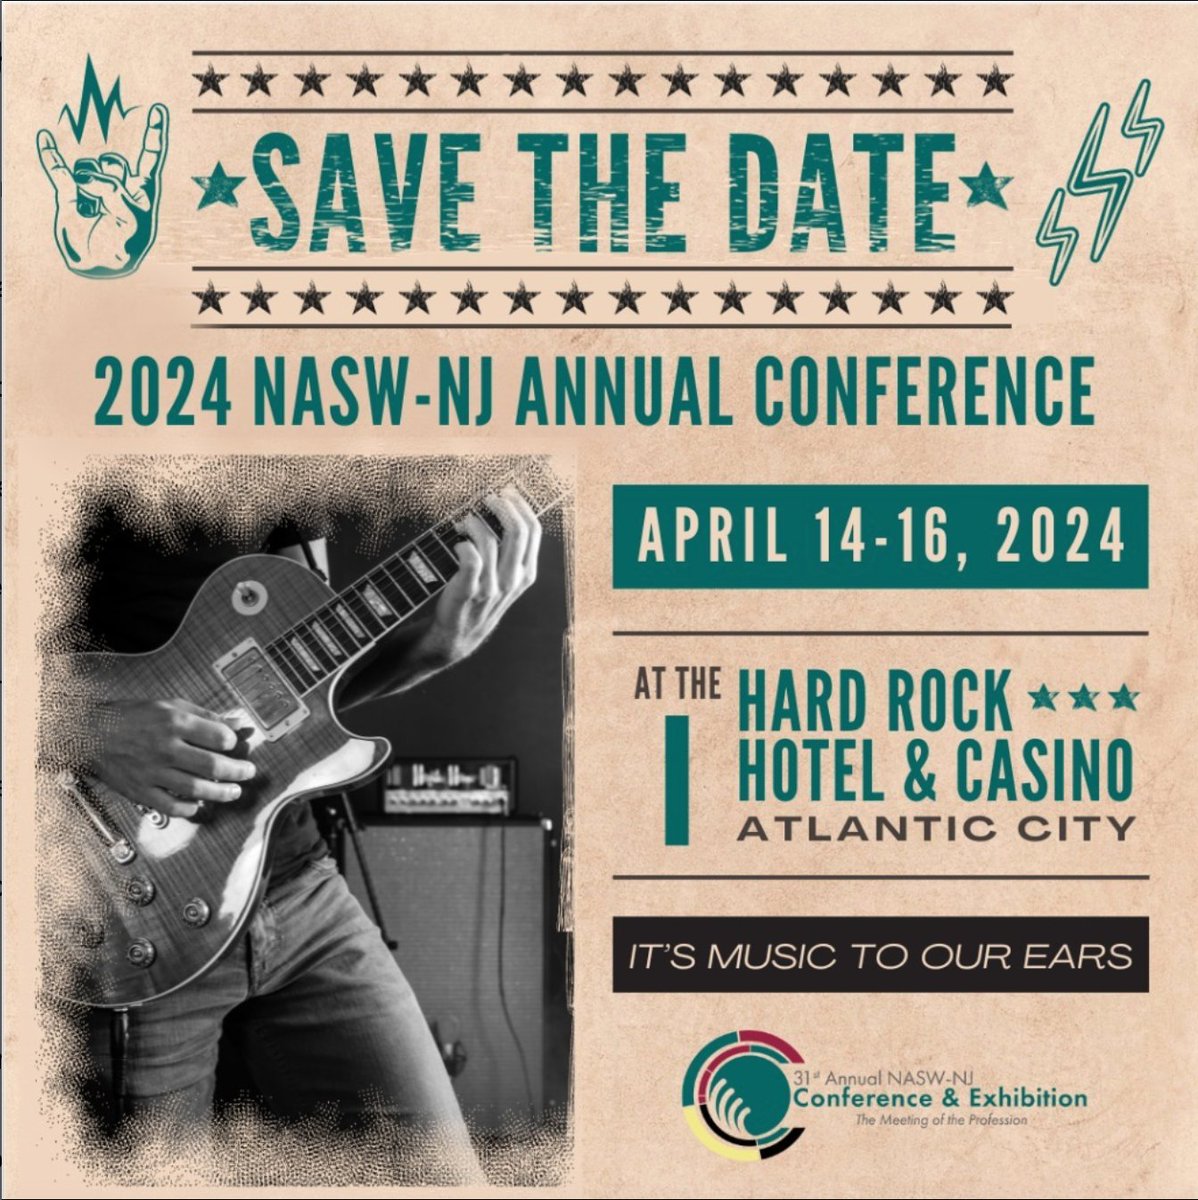 Have you heard the news?! The 2024 NASW-NJ Annual Conference will be held at the world class Hard Rock Hotel and Casino in Atlantic City, NJ on April 14-16, 2024!! Add your name to our Conference Interest Form to be notified directly via email: form.jotform.com/232854618472160